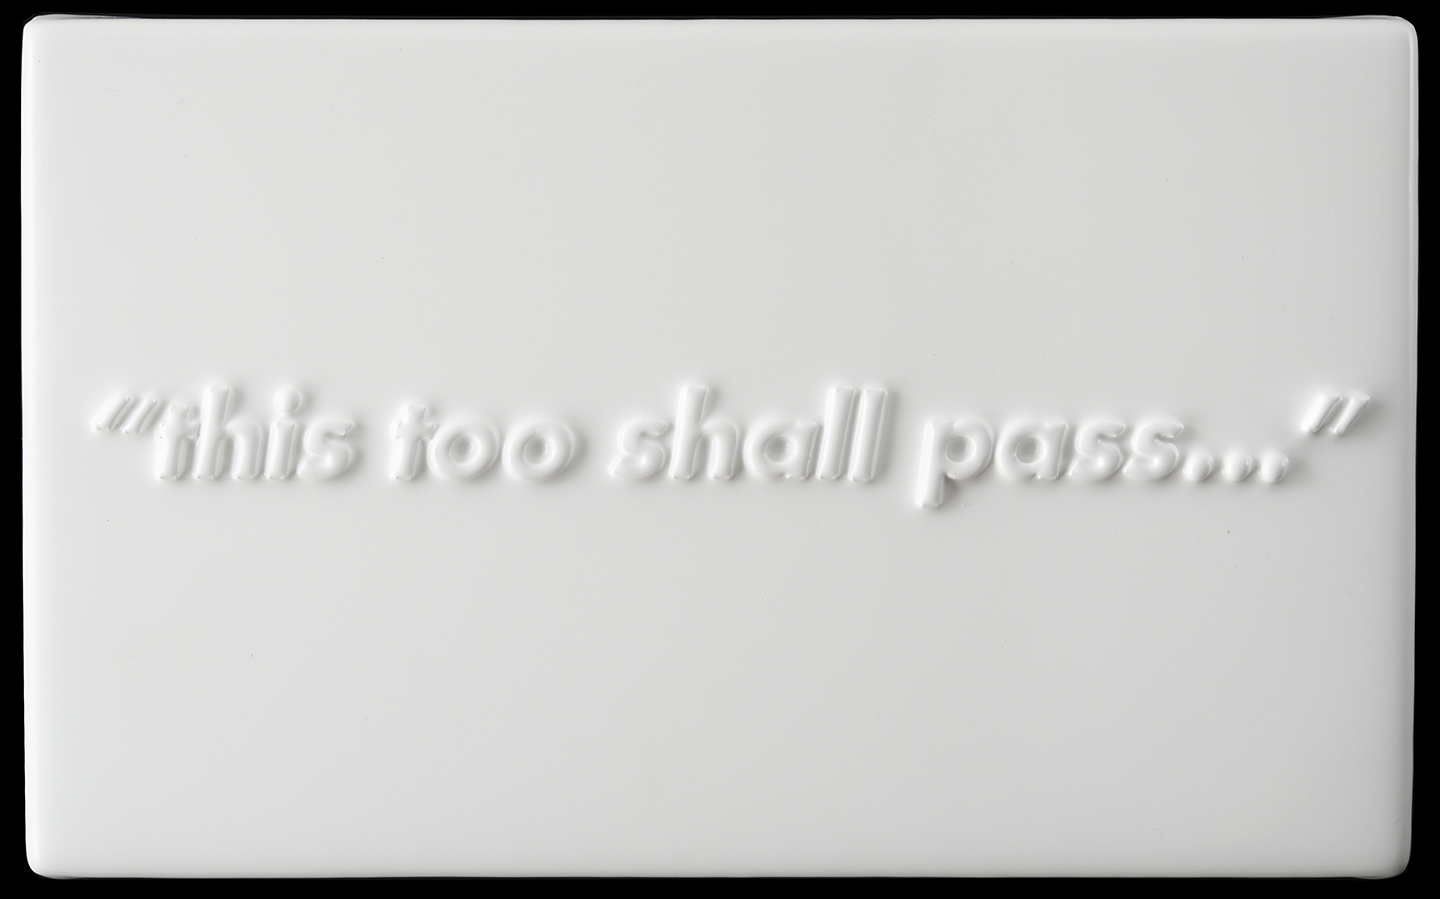 Rapp This Too Shall Pass